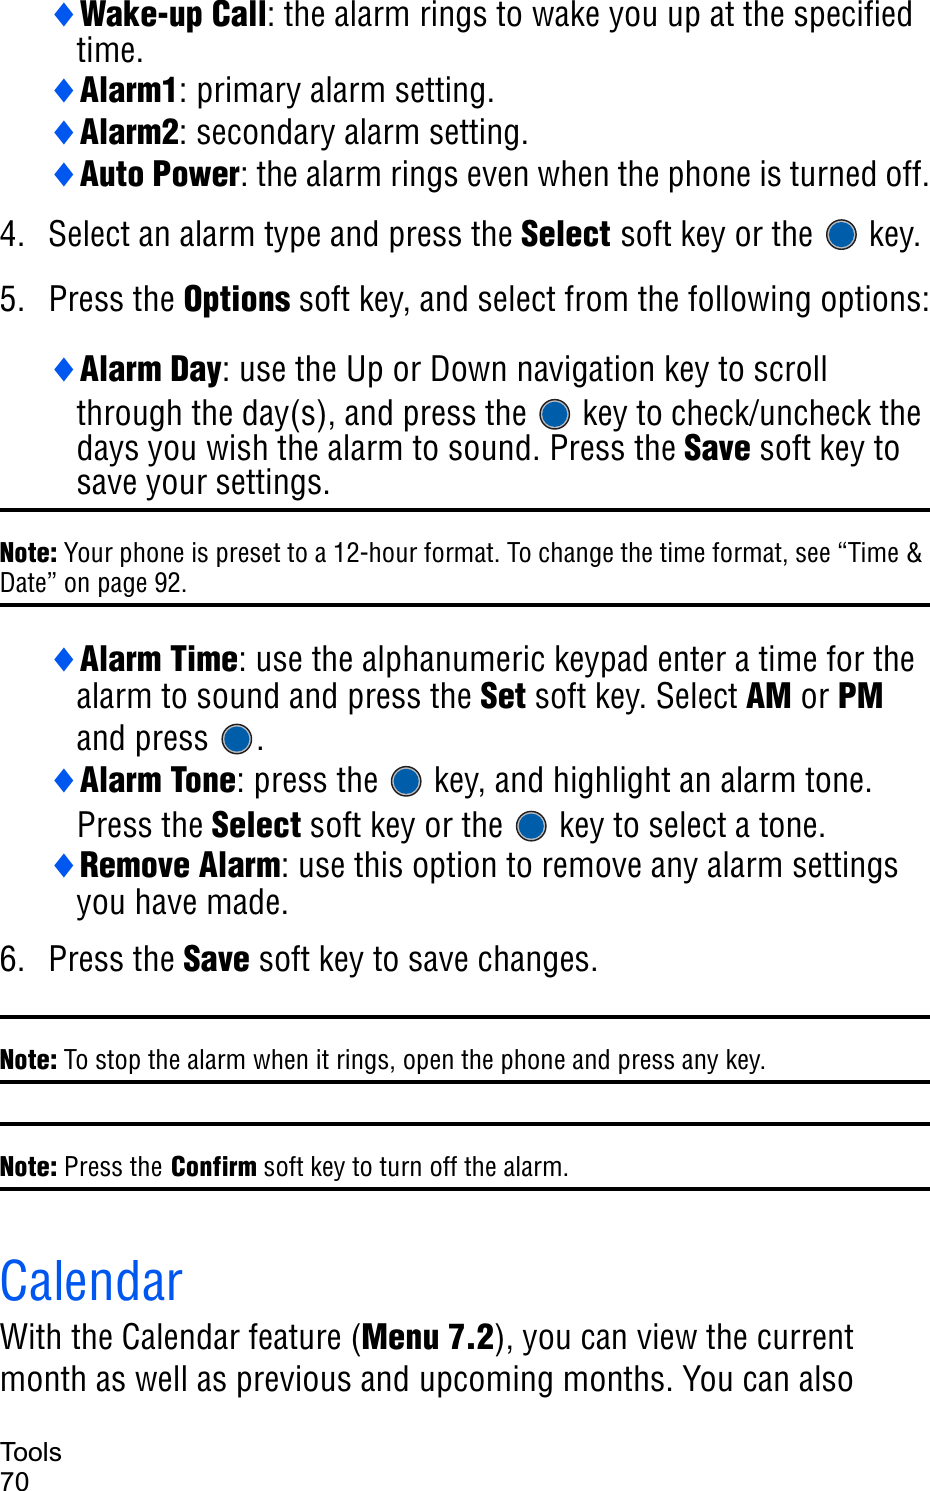 Tools70iWake-up Call: the alarm rings to wake you up at the specified time.iAlarm1: primary alarm setting.iAlarm2: secondary alarm setting.iAuto Power: the alarm rings even when the phone is turned off.4. Select an alarm type and press the Select soft key or the   key. 5. Press the Options soft key, and select from the following options:iAlarm Day: use the Up or Down navigation key to scroll through the day(s), and press the   key to check/uncheck the days you wish the alarm to sound. Press the Save soft key to save your settings.Note: Your phone is preset to a 12-hour format. To change the time format, see “Time &amp; Date” on page 92.iAlarm Time: use the alphanumeric keypad enter a time for the alarm to sound and press the Set soft key. Select AM or PMand press  .iAlarm Tone: press the   key, and highlight an alarm tone. Press the Select soft key or the   key to select a tone.iRemove Alarm: use this option to remove any alarm settings you have made.6. Press the Save soft key to save changes.Note: To stop the alarm when it rings, open the phone and press any key.Note: Press the Confirm soft key to turn off the alarm.   CalendarWith the Calendar feature (Menu 7.2), you can view the current month as well as previous and upcoming months. You can also 